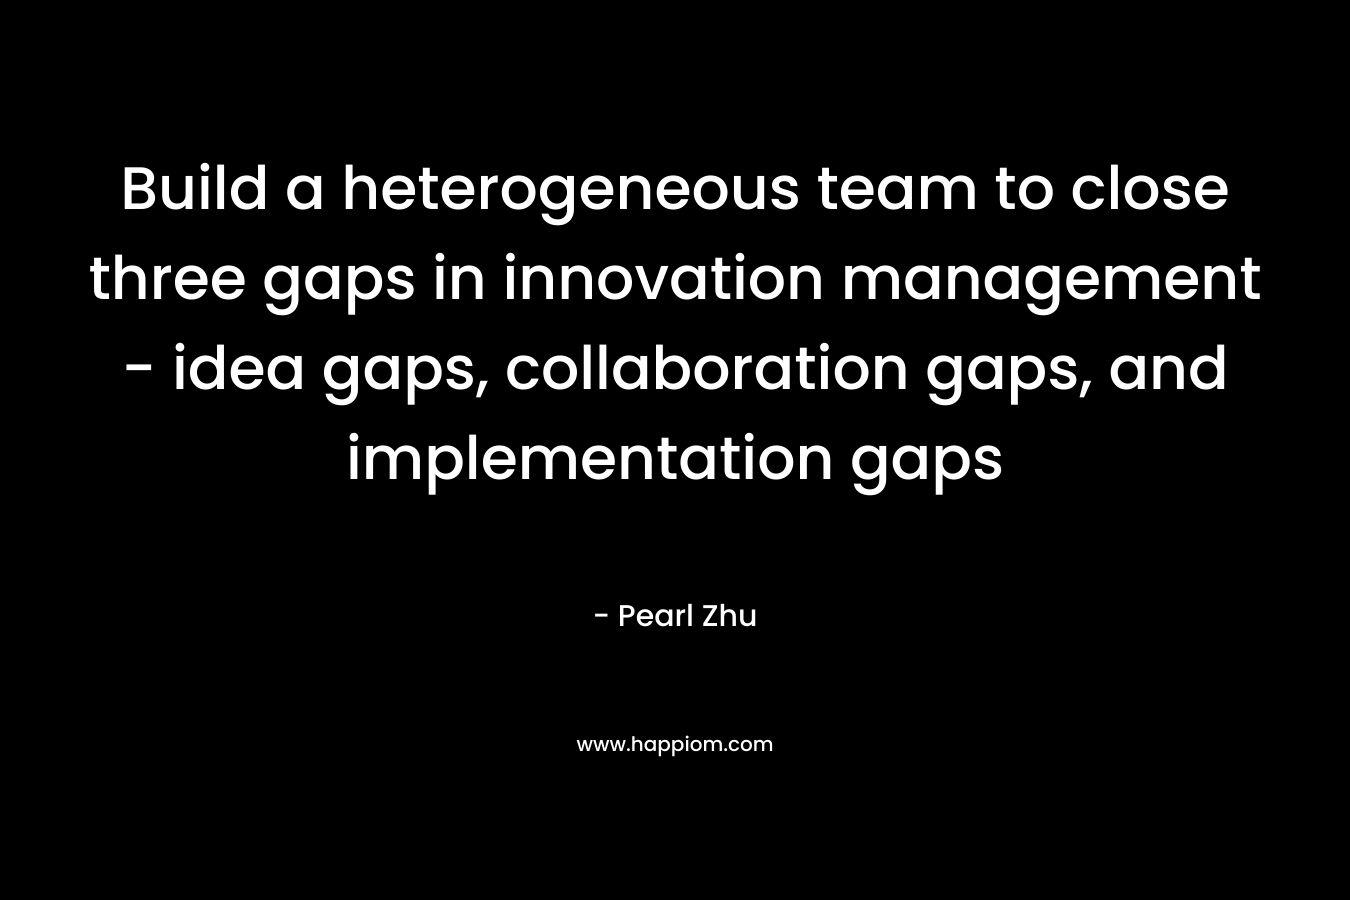 Build a heterogeneous team to close three gaps in innovation management - idea gaps, collaboration gaps, and implementation gaps